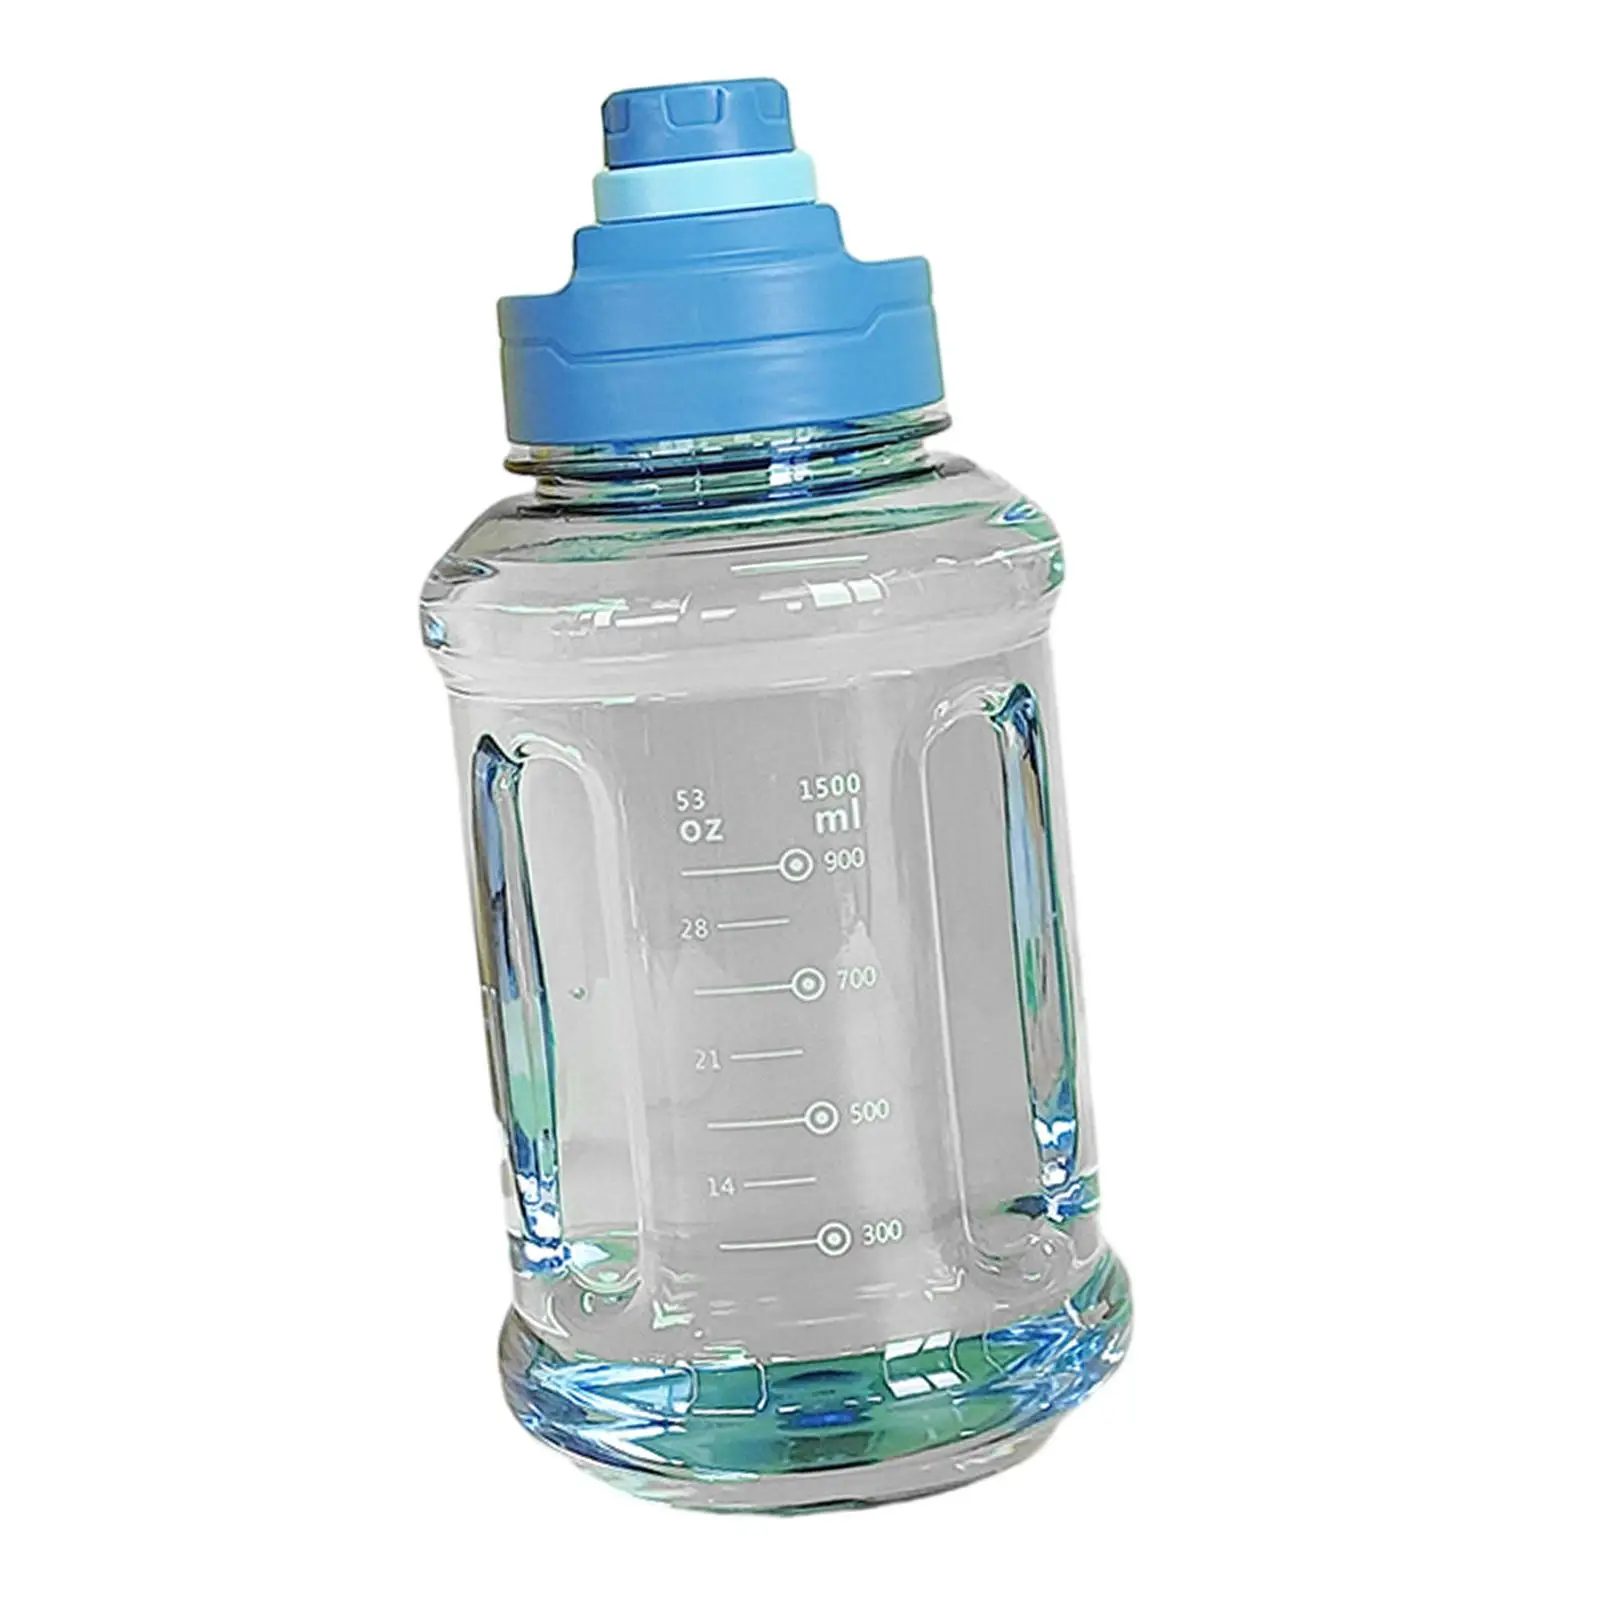 Gym Bottle 1.5L Fitness Accessories Portable Reusable 11x24cm Leakproof Large Capacity with Scale Water Bottle with Handle